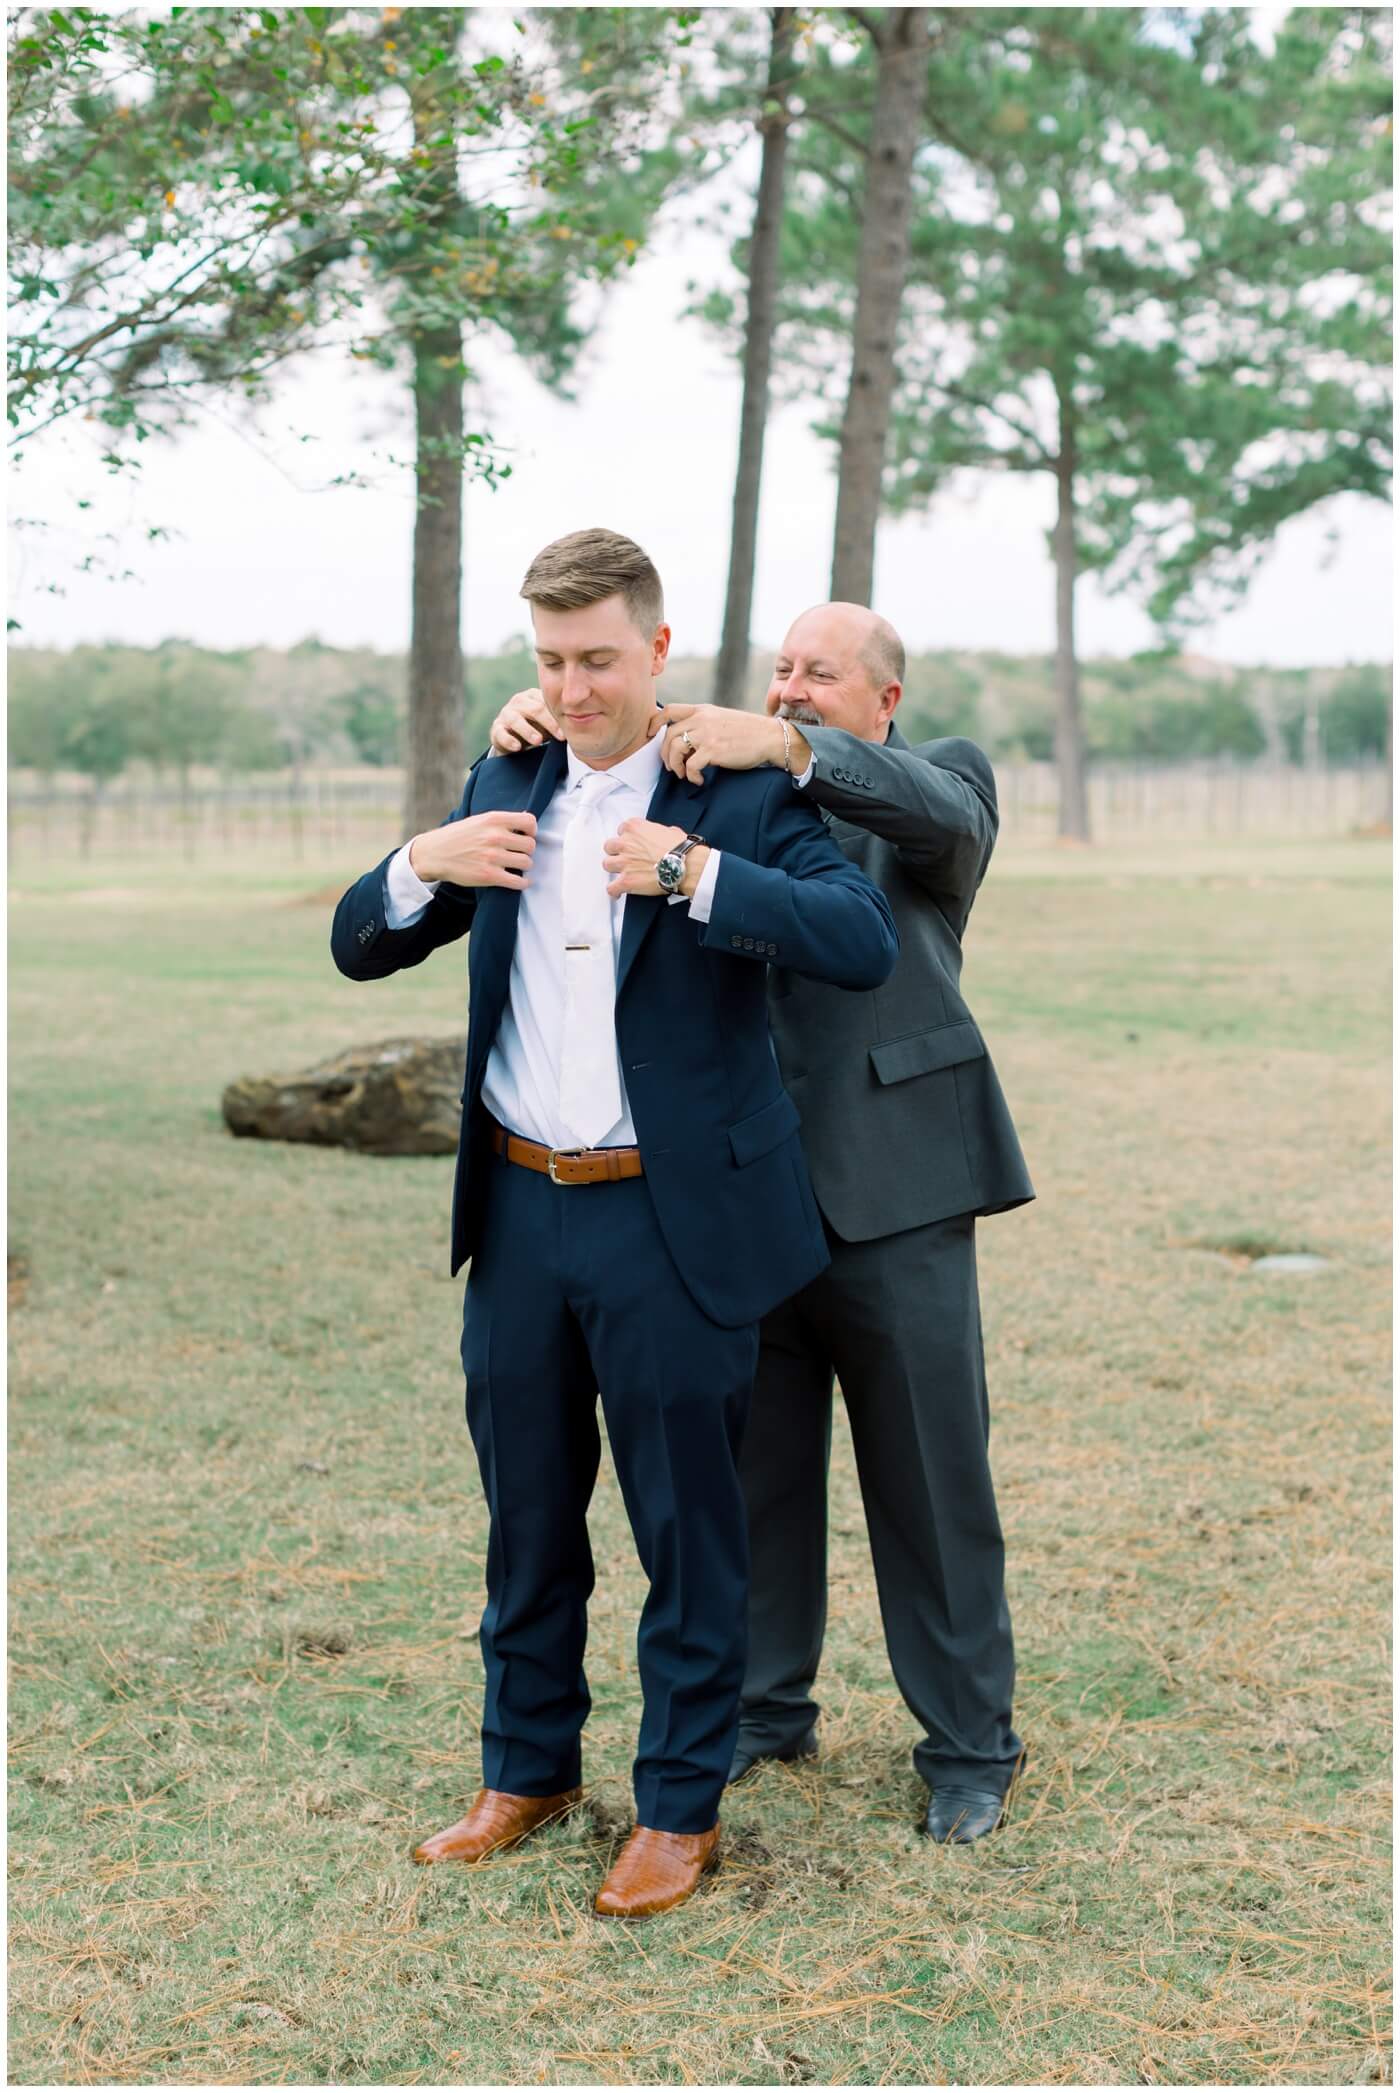 Houston Wedding at The Vine | the groom's father helps the groom put on his jacket